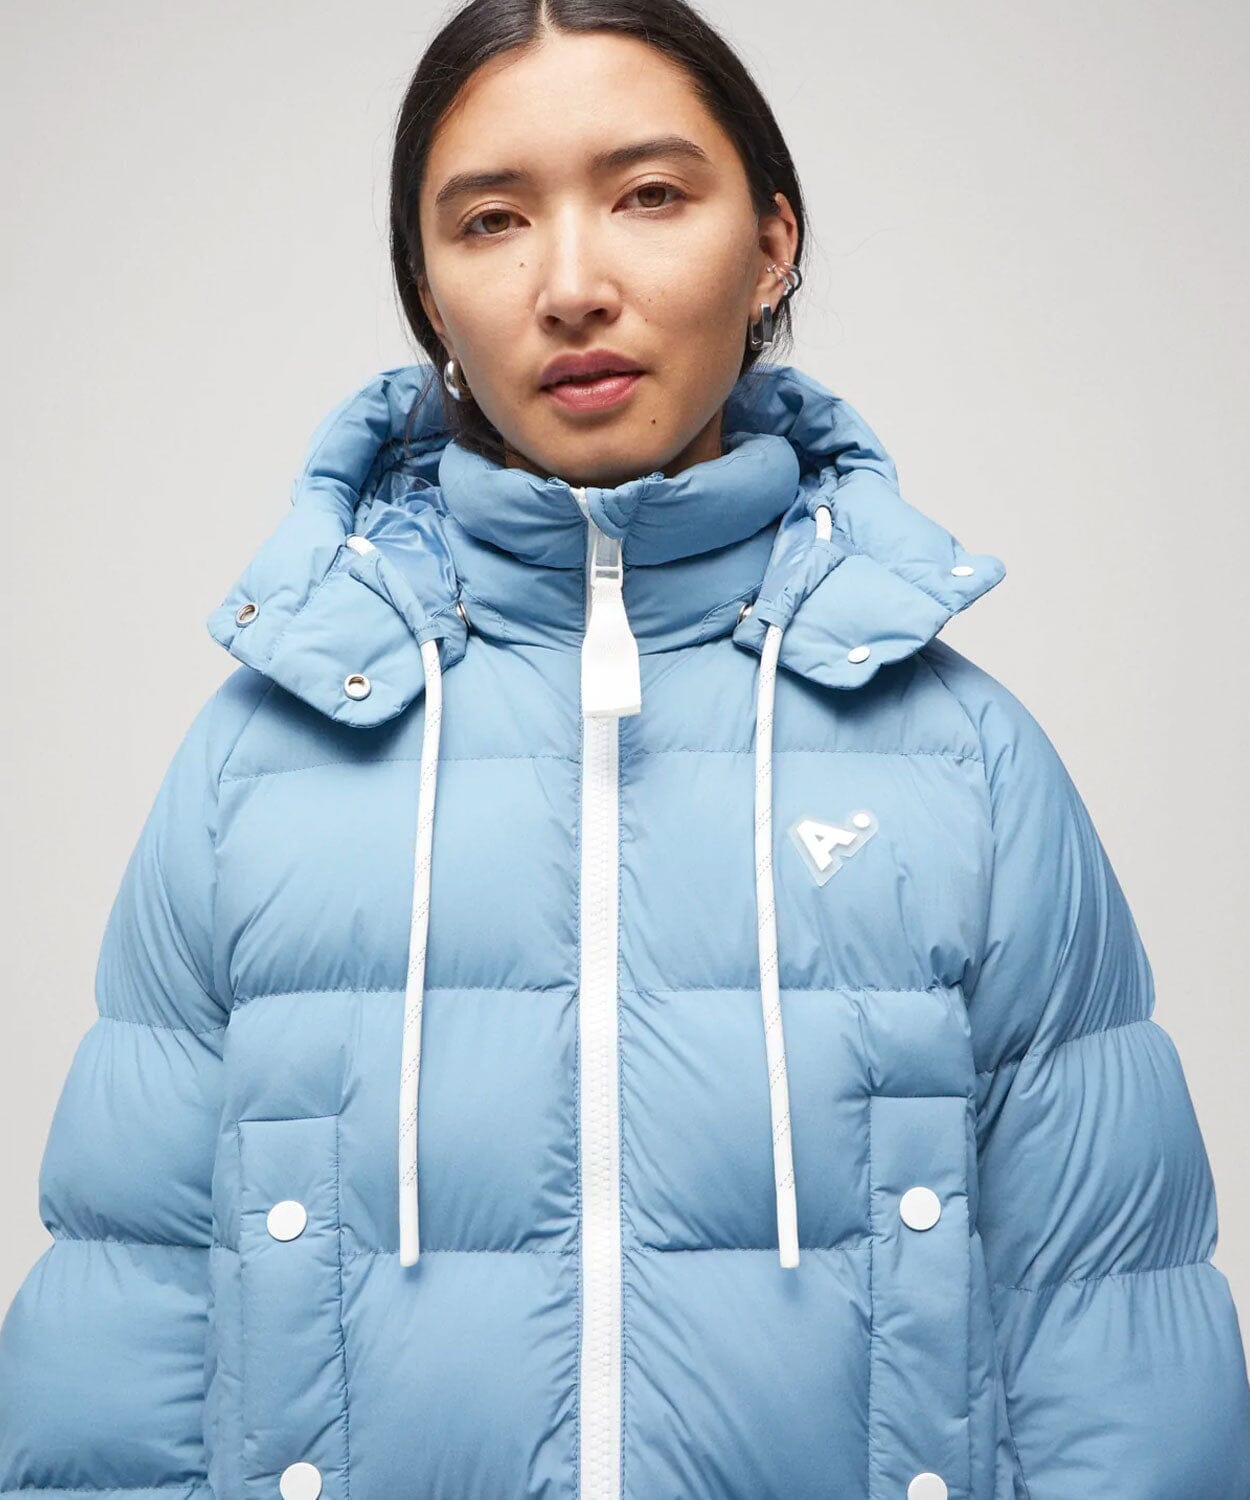 Women's Turbo Puffer Jackets The Arrivals 